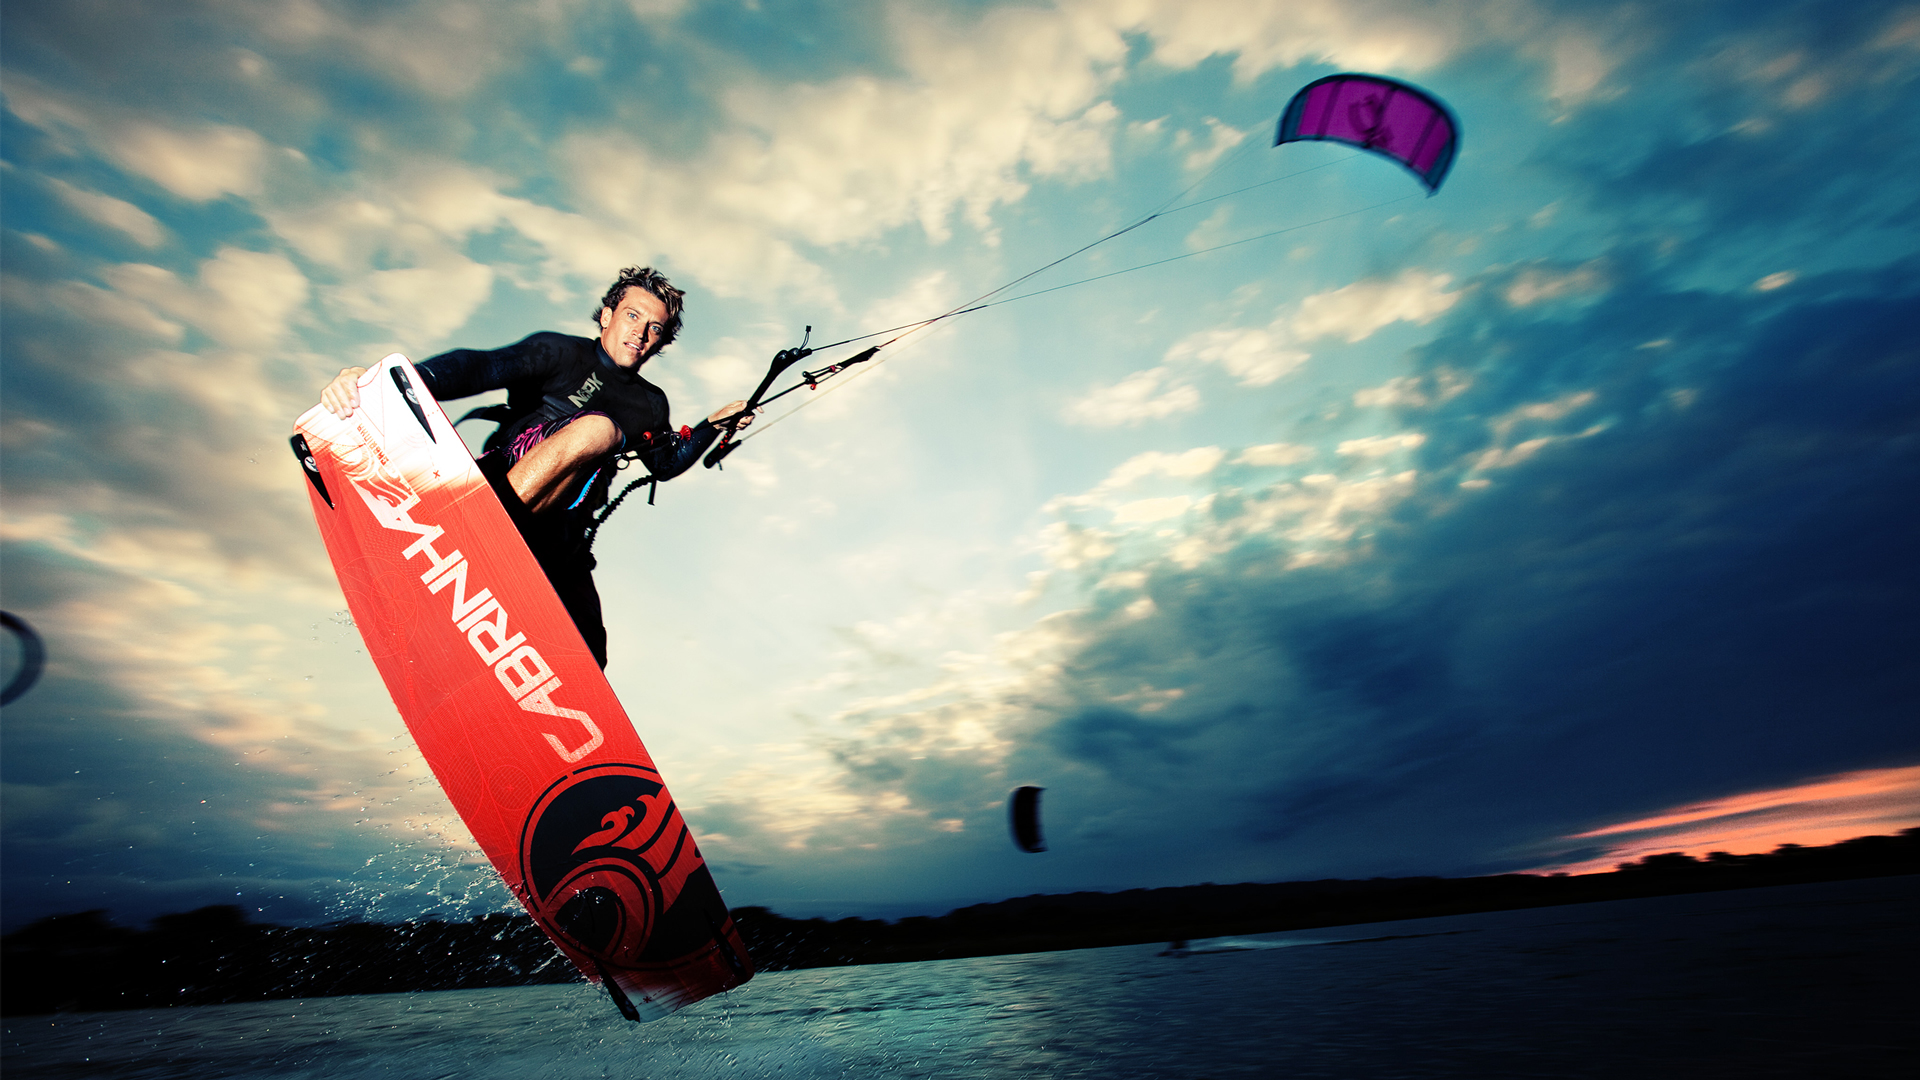 kitesurf wallpaper image - Damien LeRoy with a tailgrab at dusk on his Cabrinha kites gear - in resolution: High Definition - HD 16:9 1920 X 1080